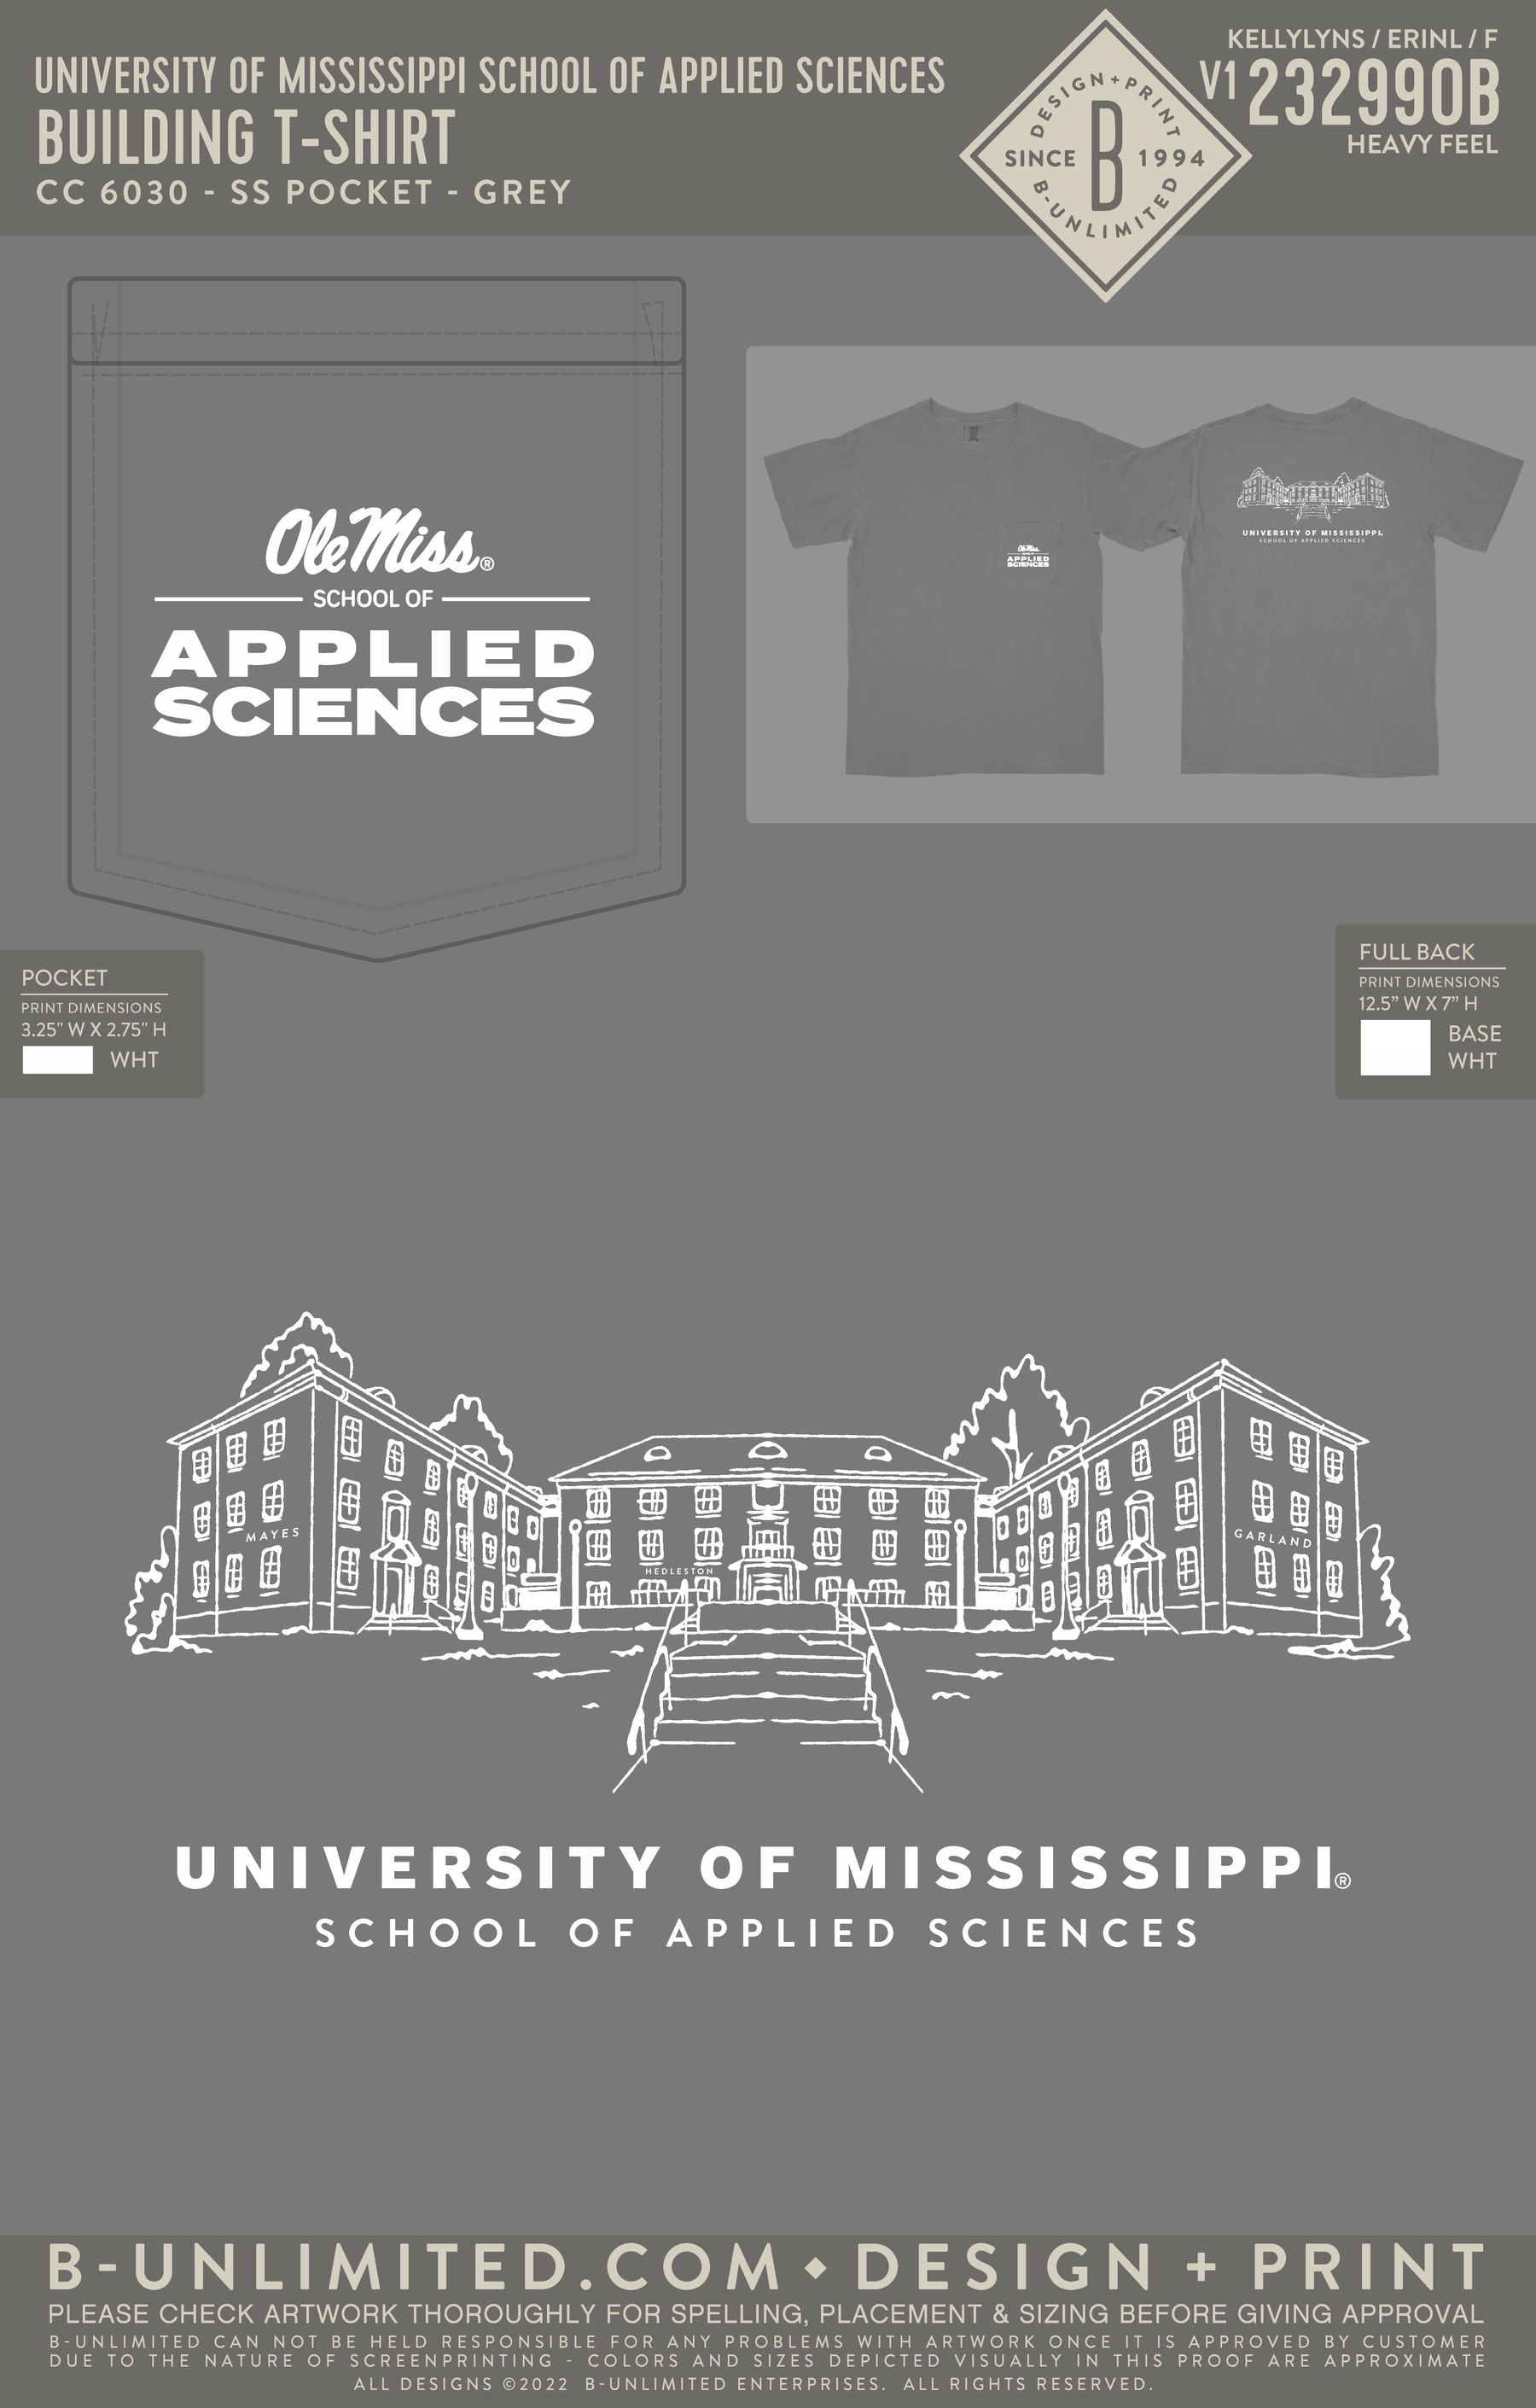 University of Mississippi School of Applied Science - Building T-Shirt - CC - 6030 - SS Pocket - Grey